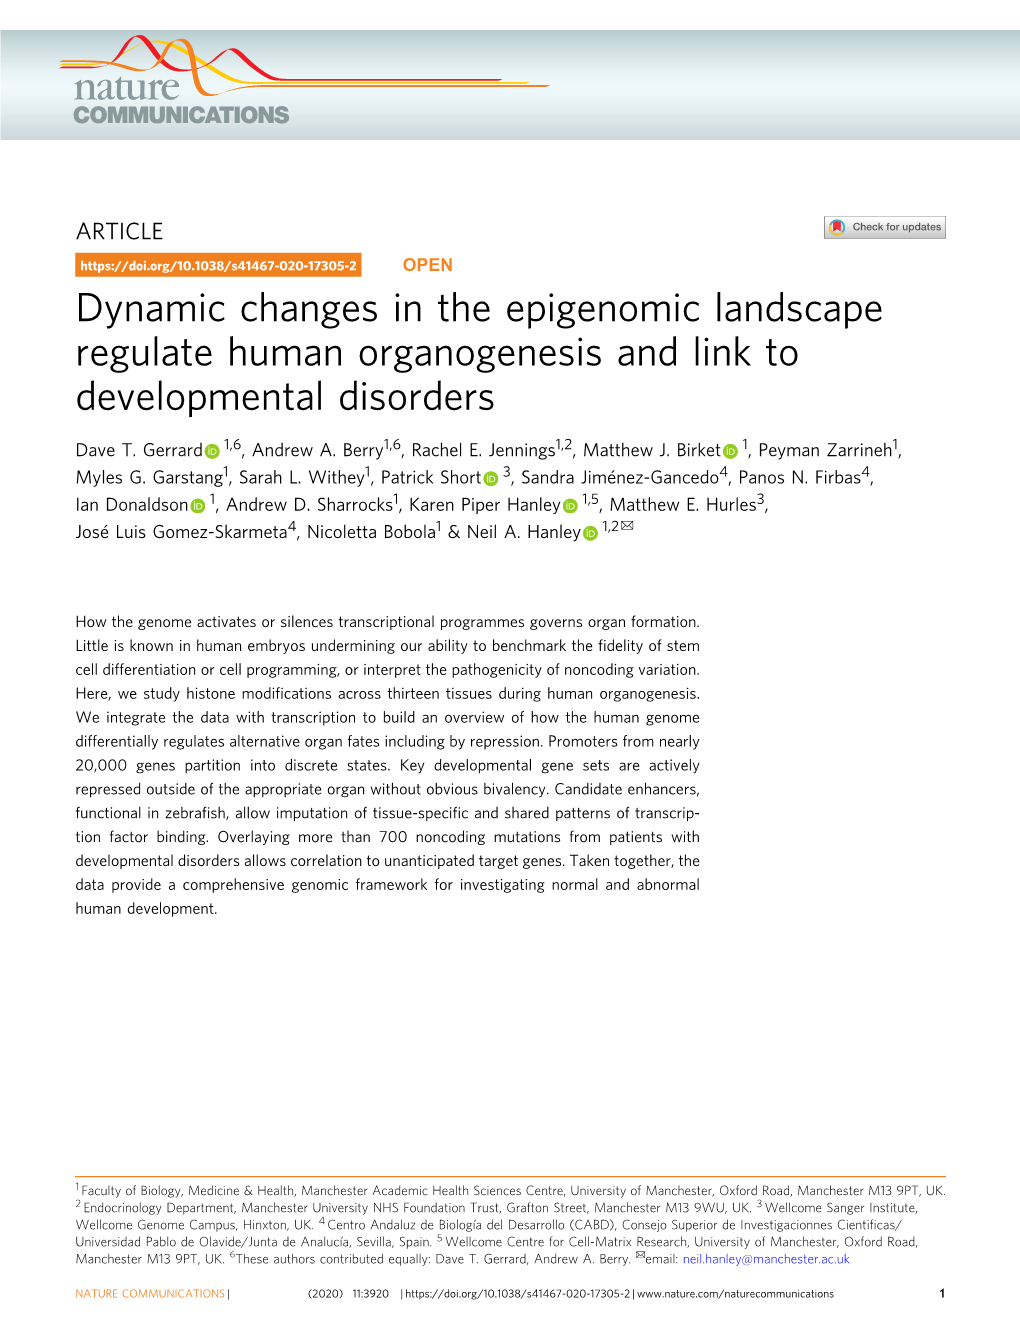 Dynamic Changes in the Epigenomic Landscape Regulate Human Organogenesis and Link to Developmental Disorders